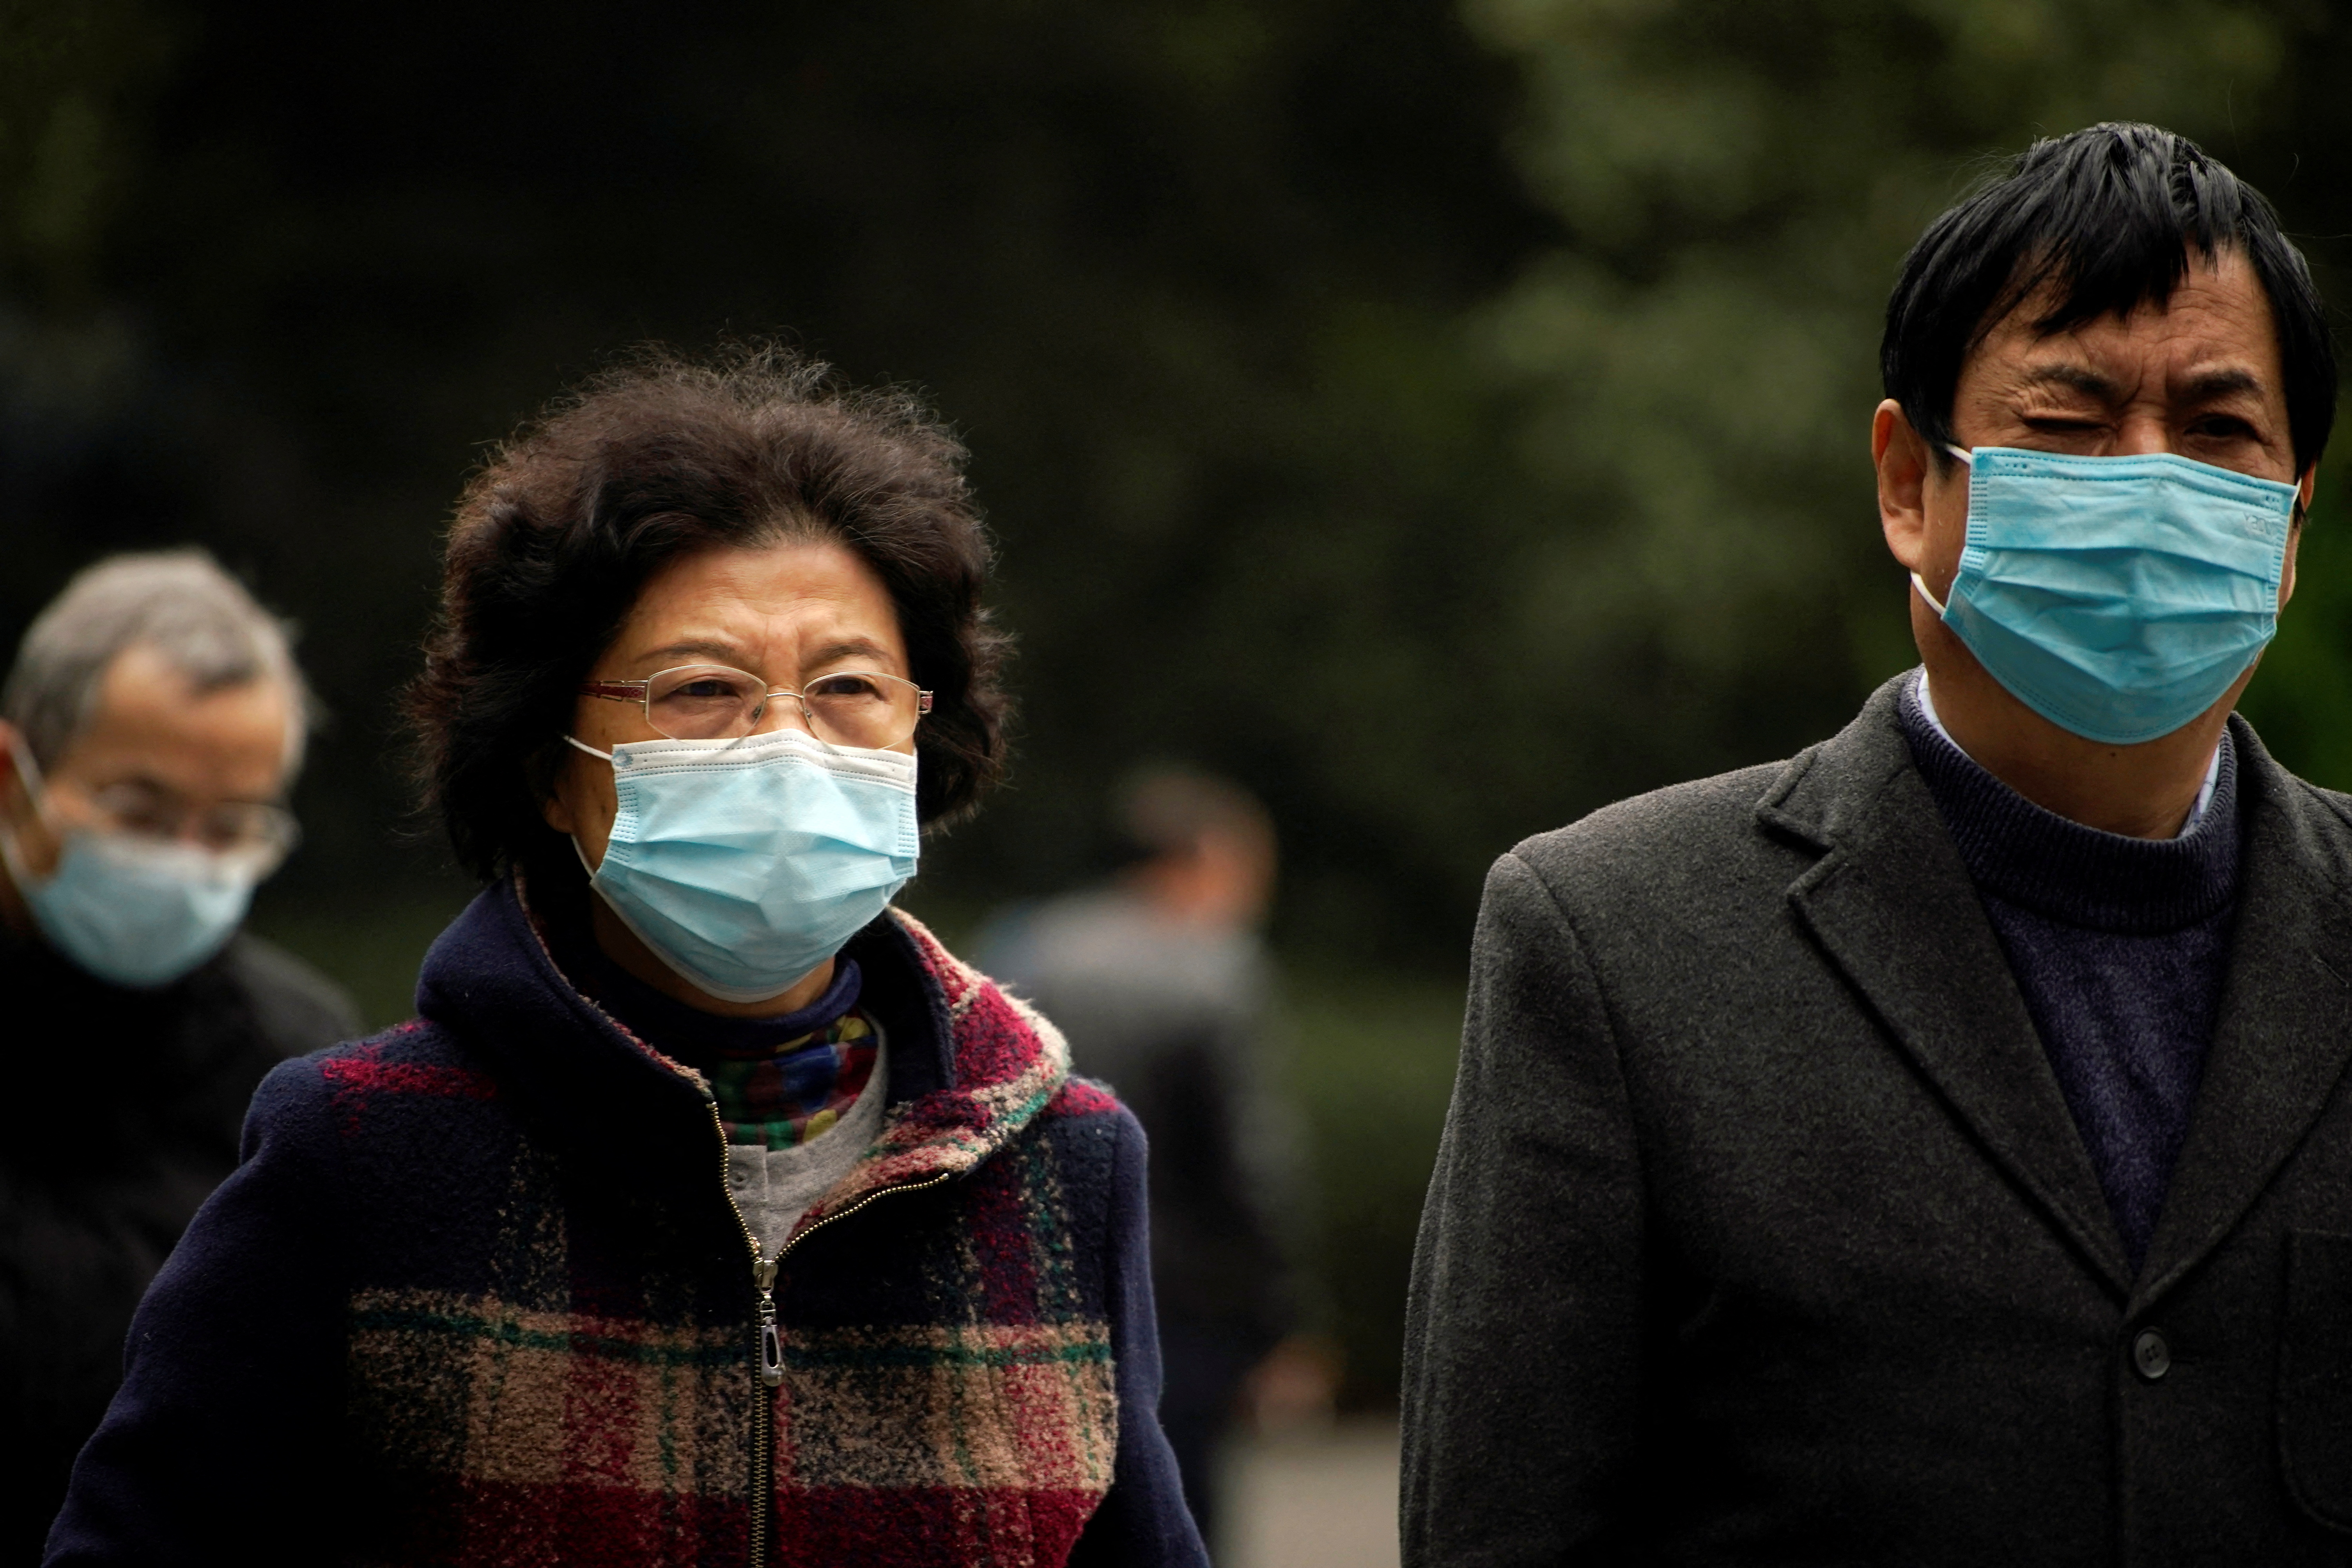 People wearing face masks following the coronavirus disease (COVID-19) outbreak walk on a street in Shanghai, China, December 14, 2021. REUTERS/Aly Song